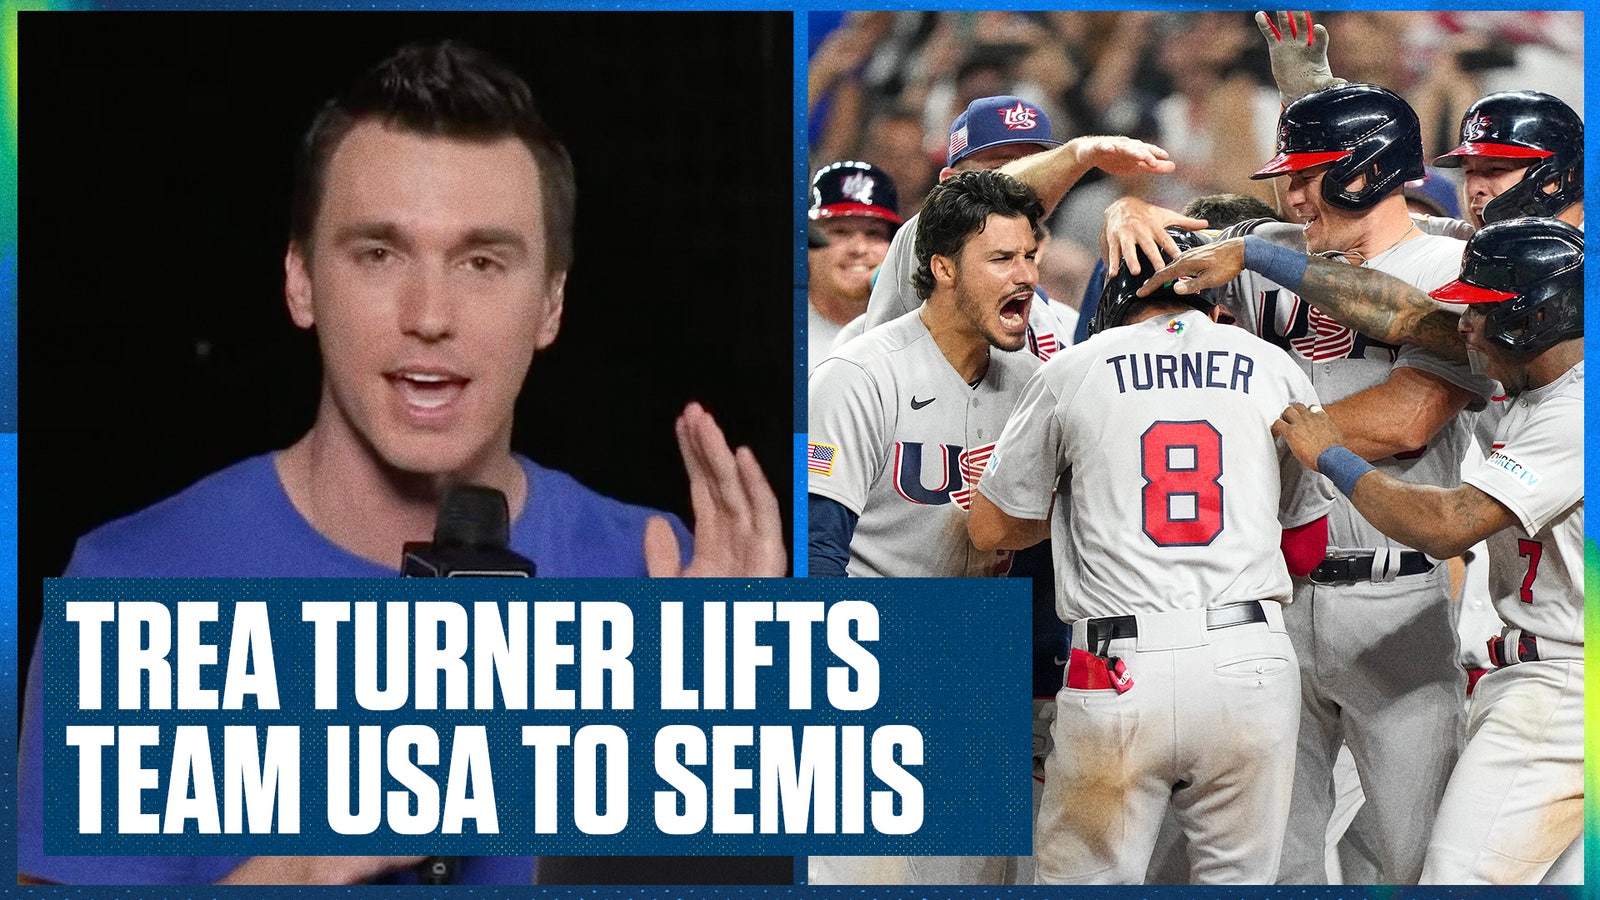 Team USA's epic comeback win to advance to the semifinals of the World Baseball Classic